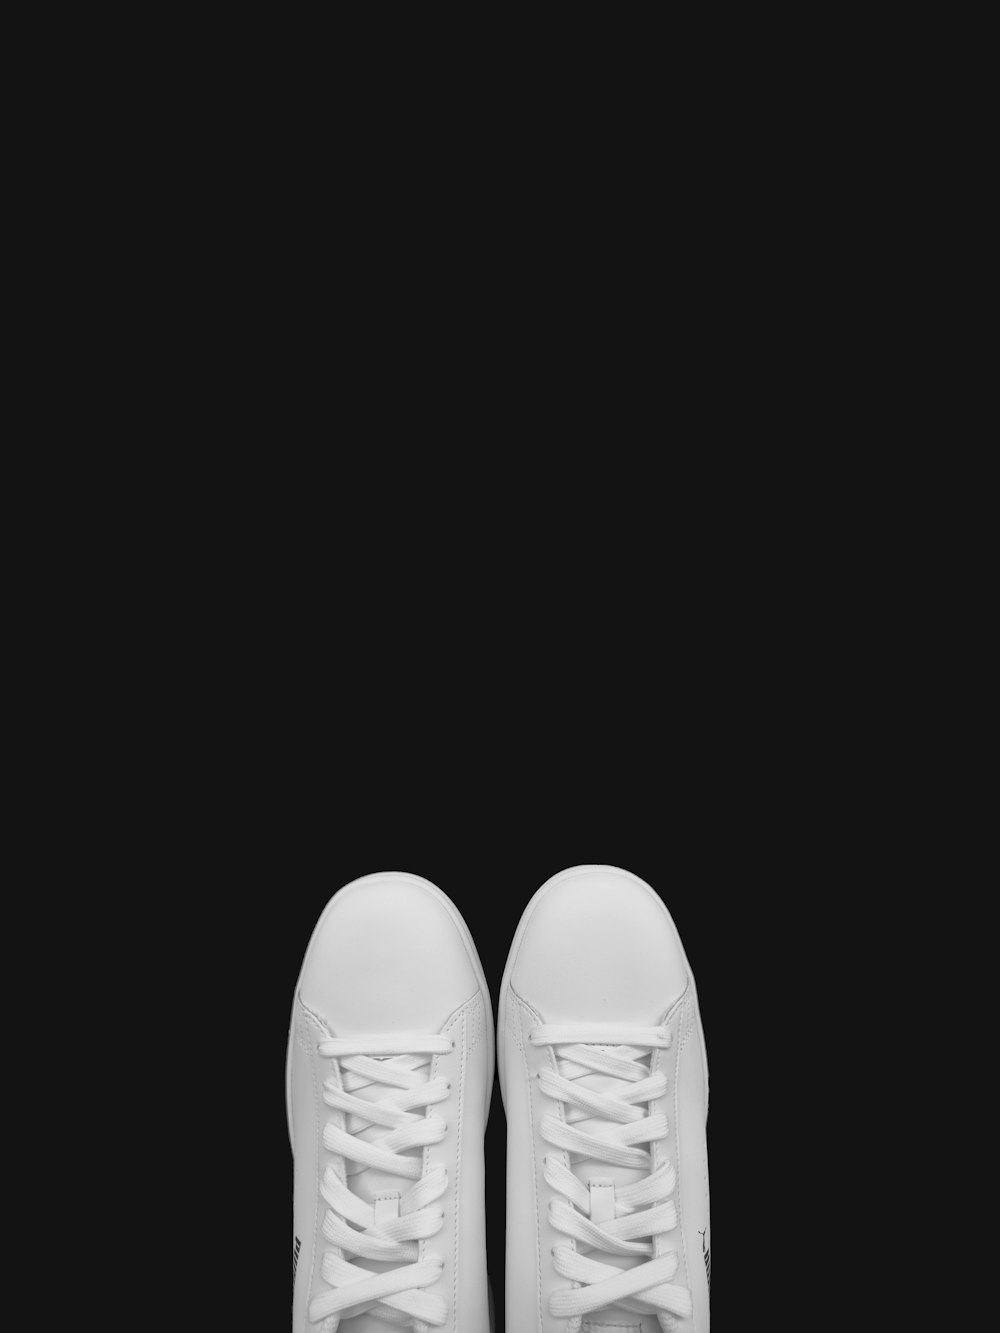 person wearing white leather shoes